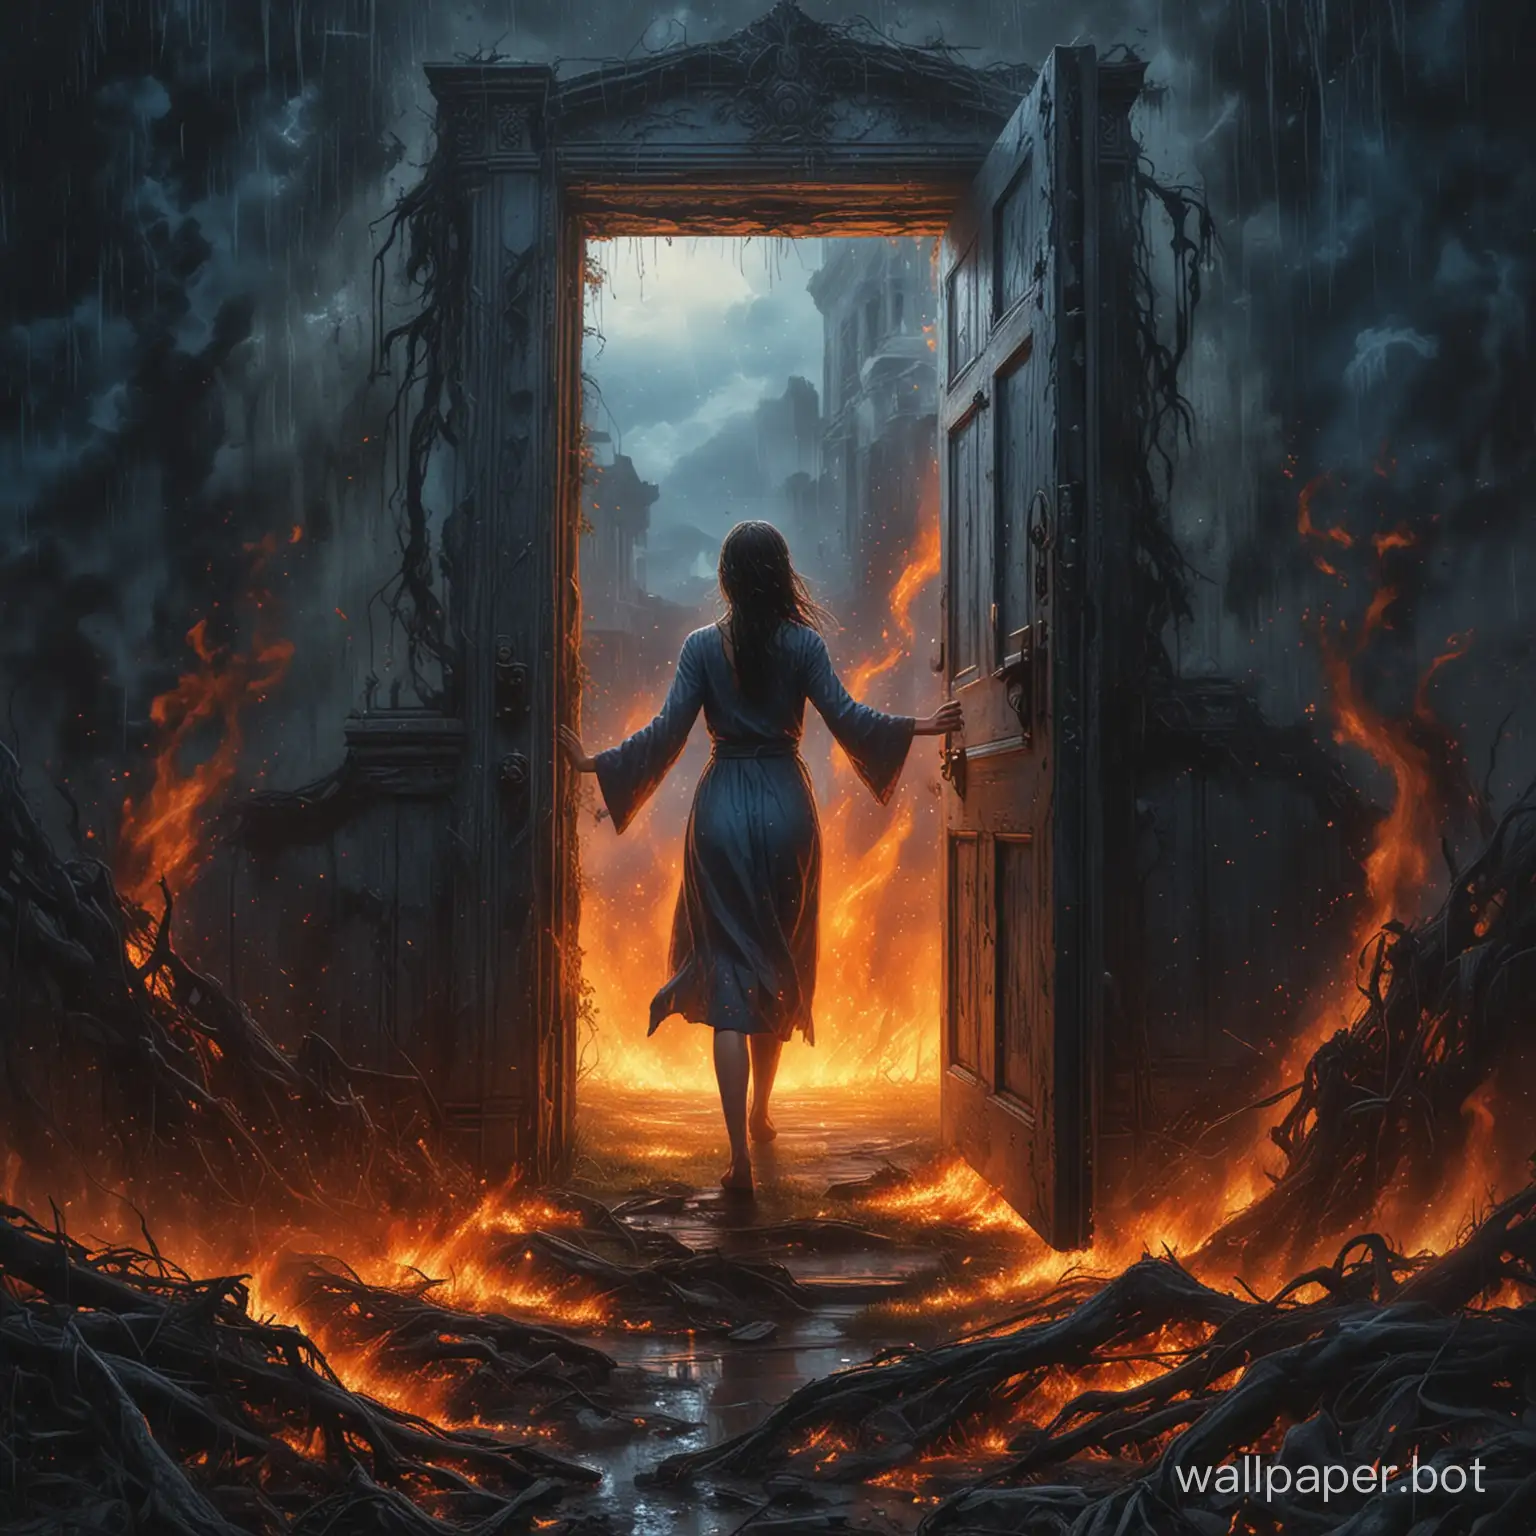 Door to a blue sky surrounded by a rain of flames in a world in ruins, a woman, black, reaches out behind the door with her feet in the grass